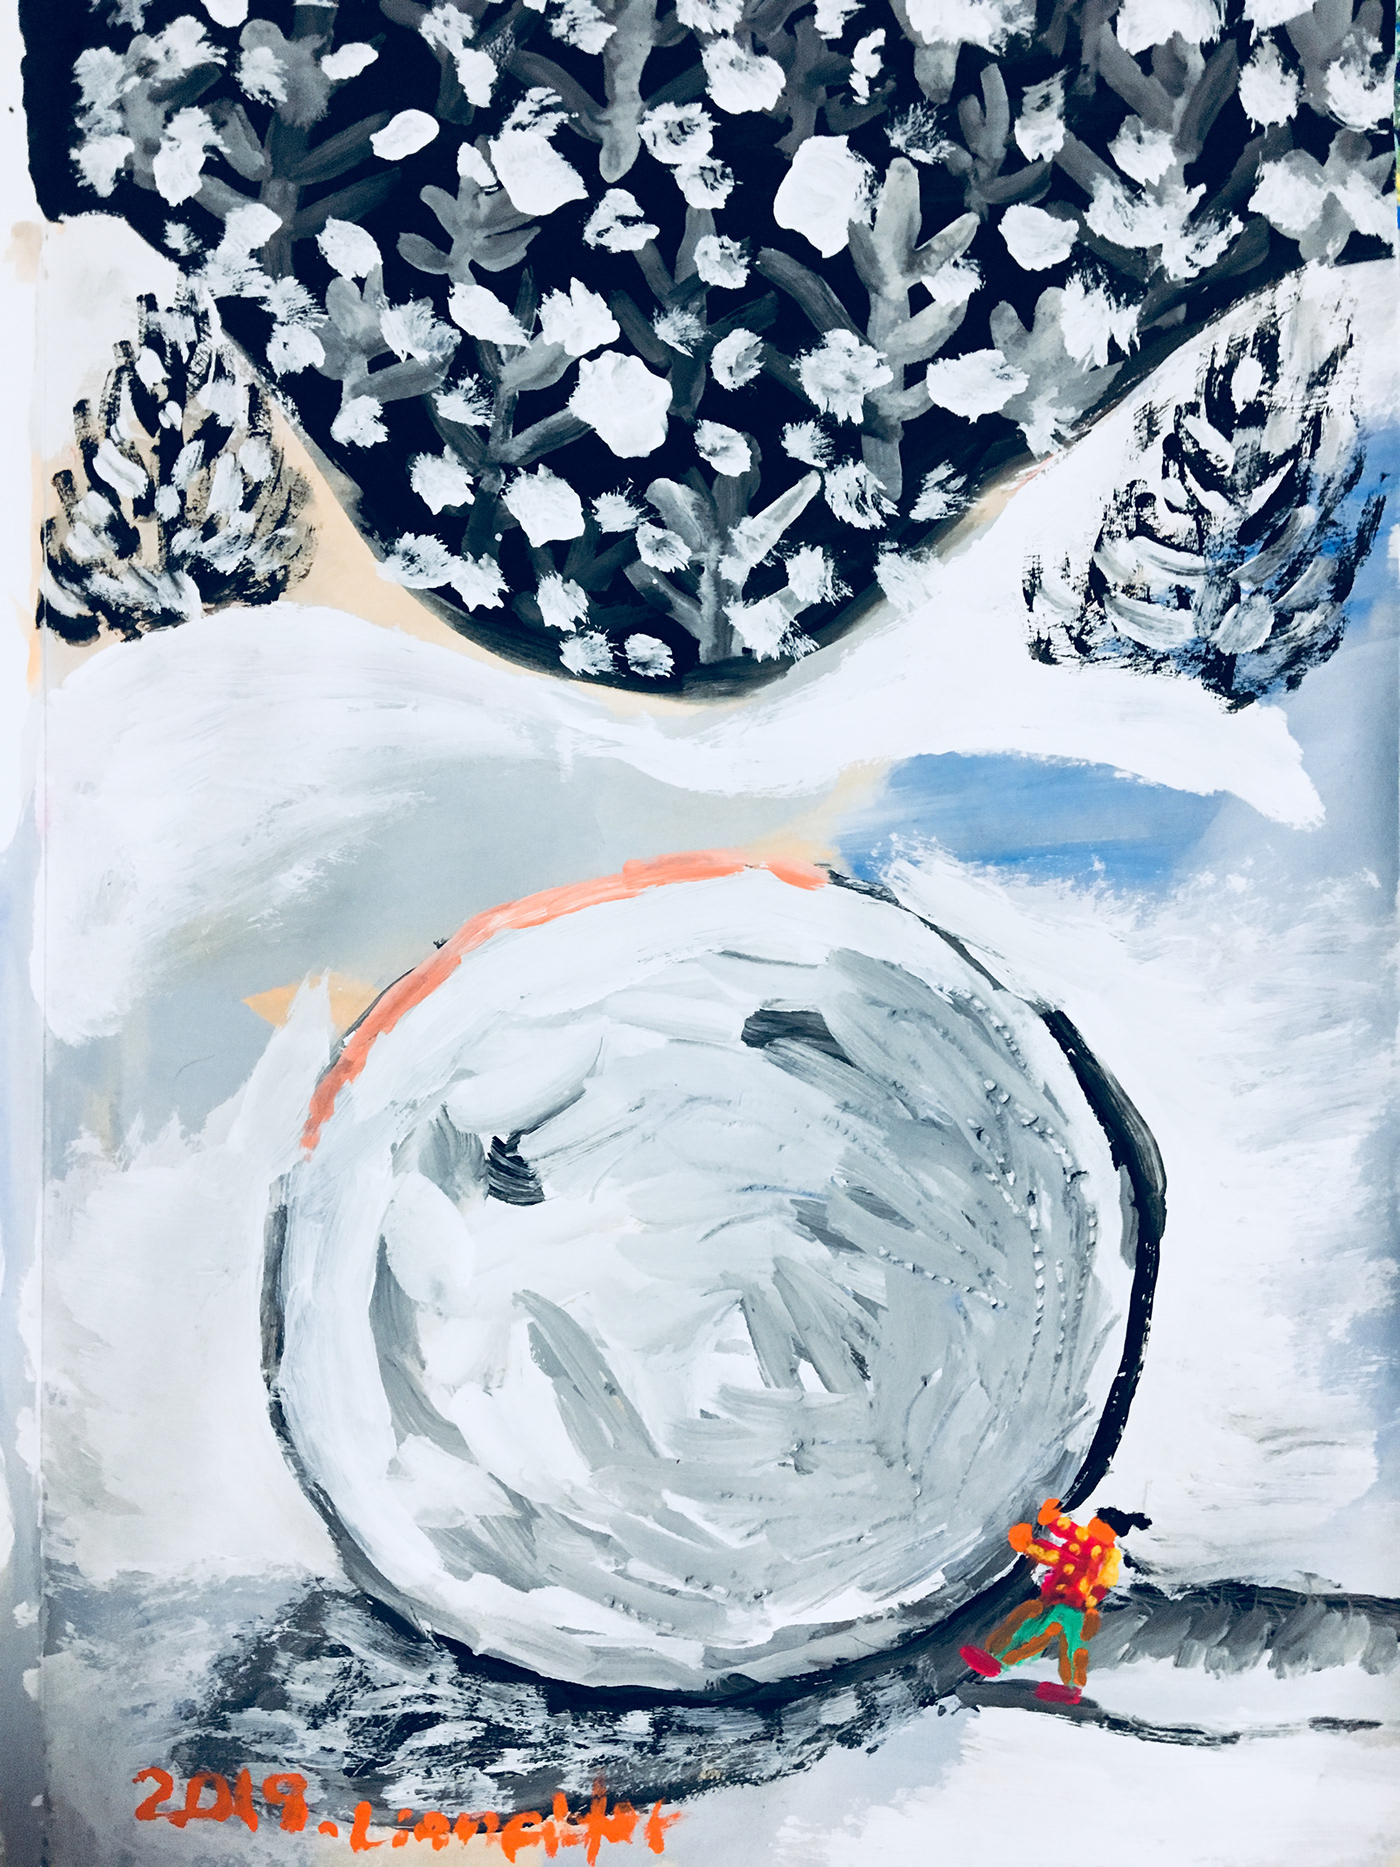 ILLUSTRATION  Drawing  snowball winter snow Roll snowfield White image art colorful pictures painting   artwork Illustrator